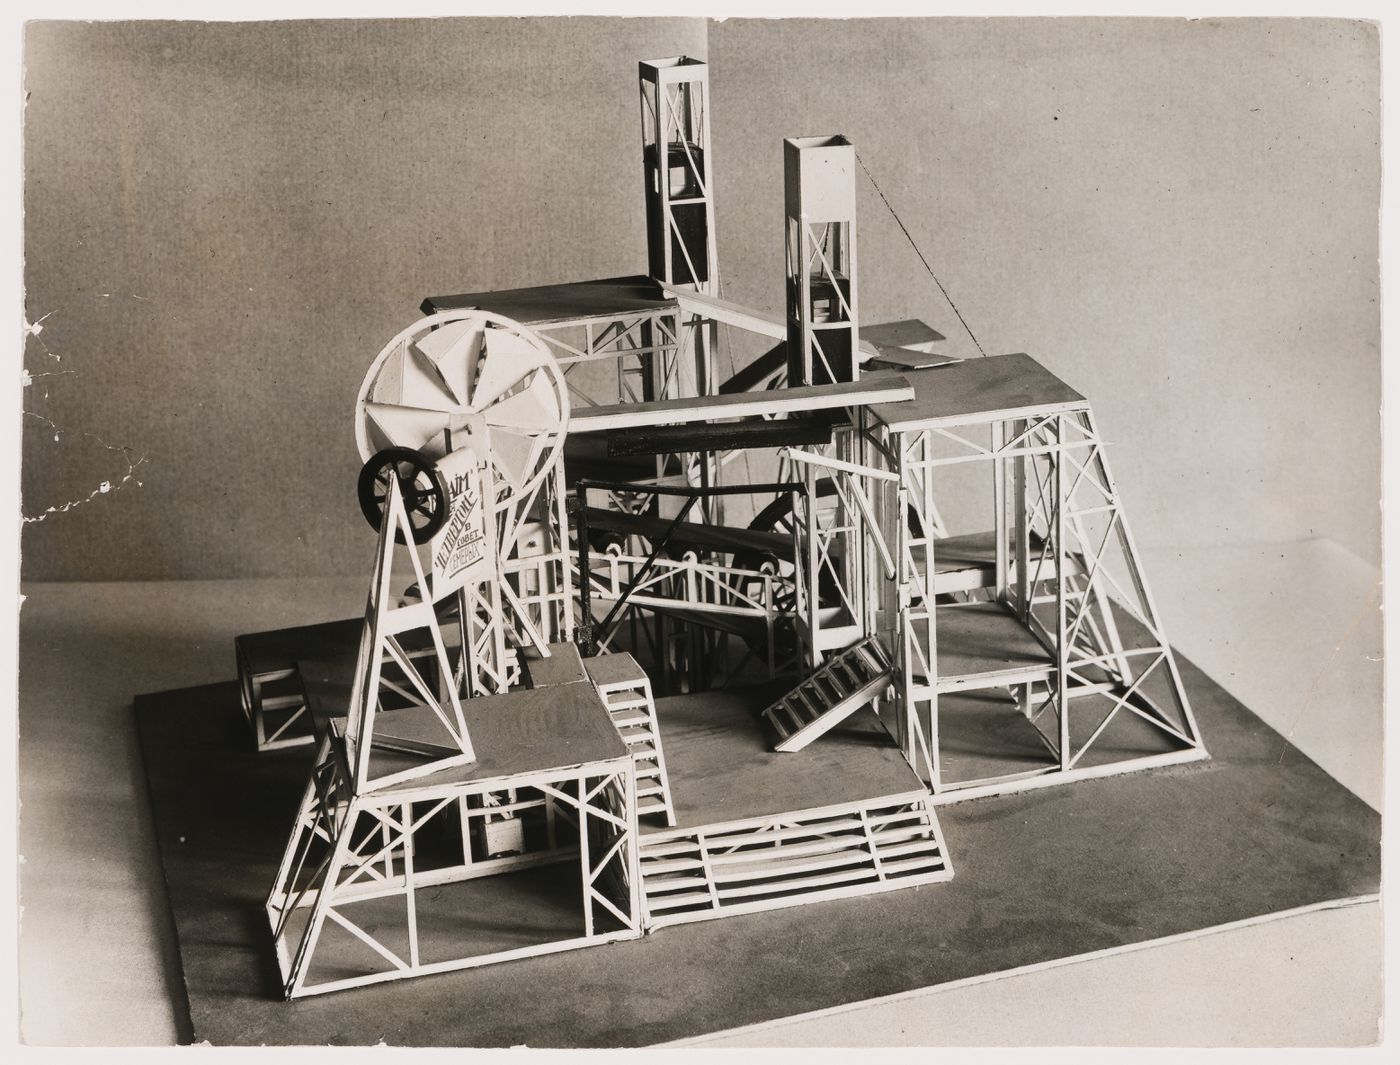 Photograph of a model for the set for Chesterton's play "The Man Who Was Thursday", Kamernyi Theatre, Moscow